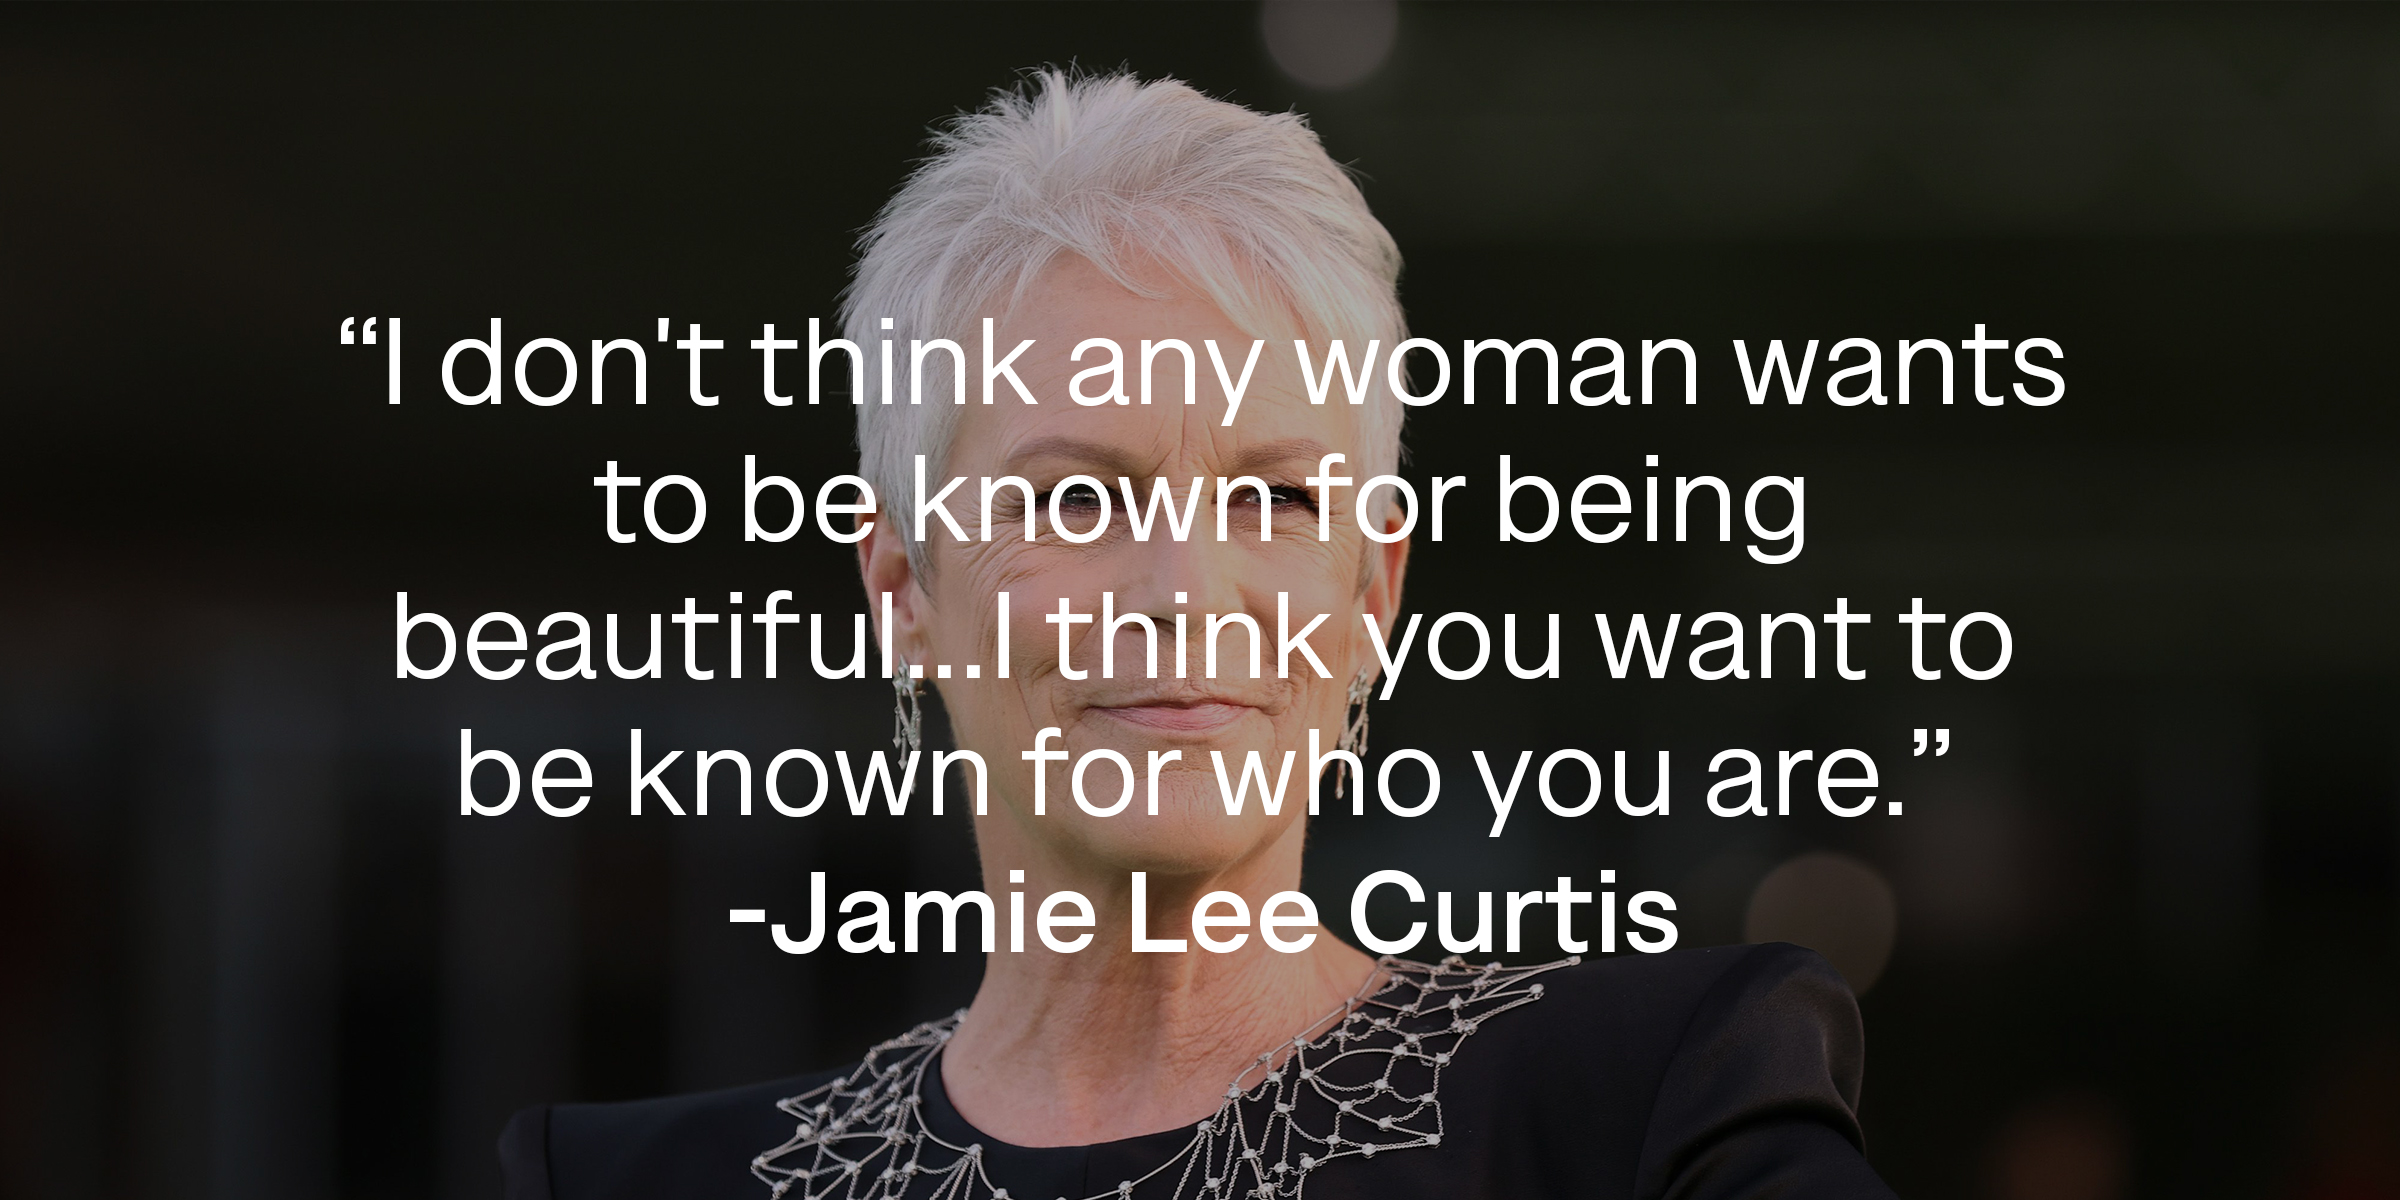 An image of Jamie Lee Curtis, with her quote: “I don't think any woman wants to be known for being beautiful...I think you want to be known for who you are.” | Source: Getty Images